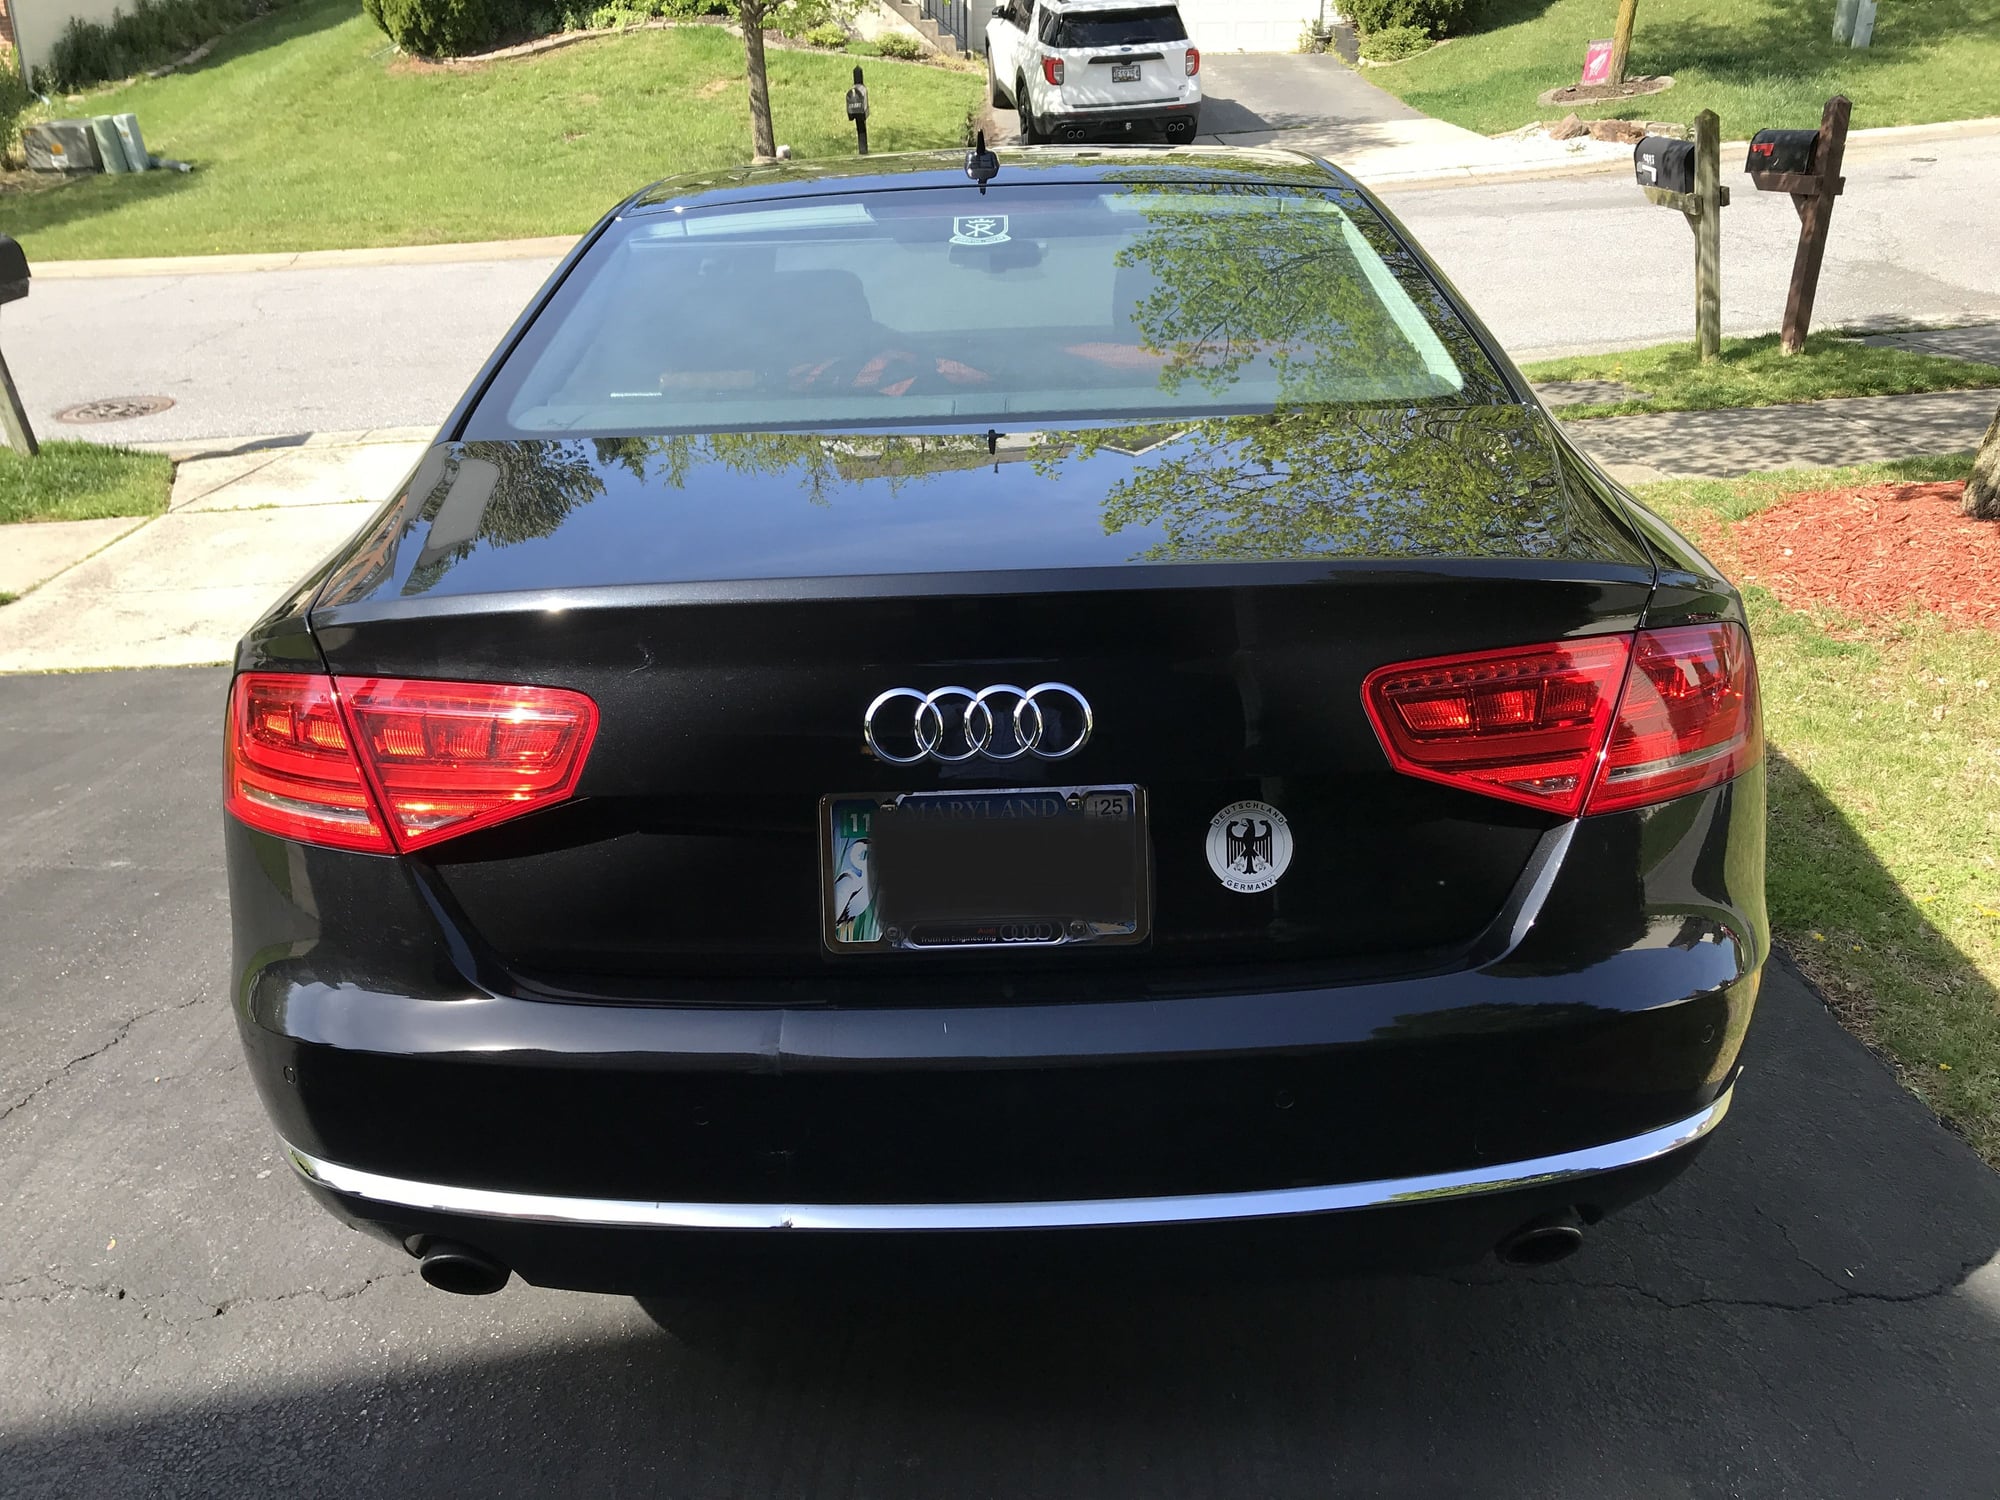 2012 Audi A8 Quattro - 2012 Audi A8L, Very Well Optioned with all records. 99K Miles - Howard County, MD. - Used - Howard County, MD 21045, United States